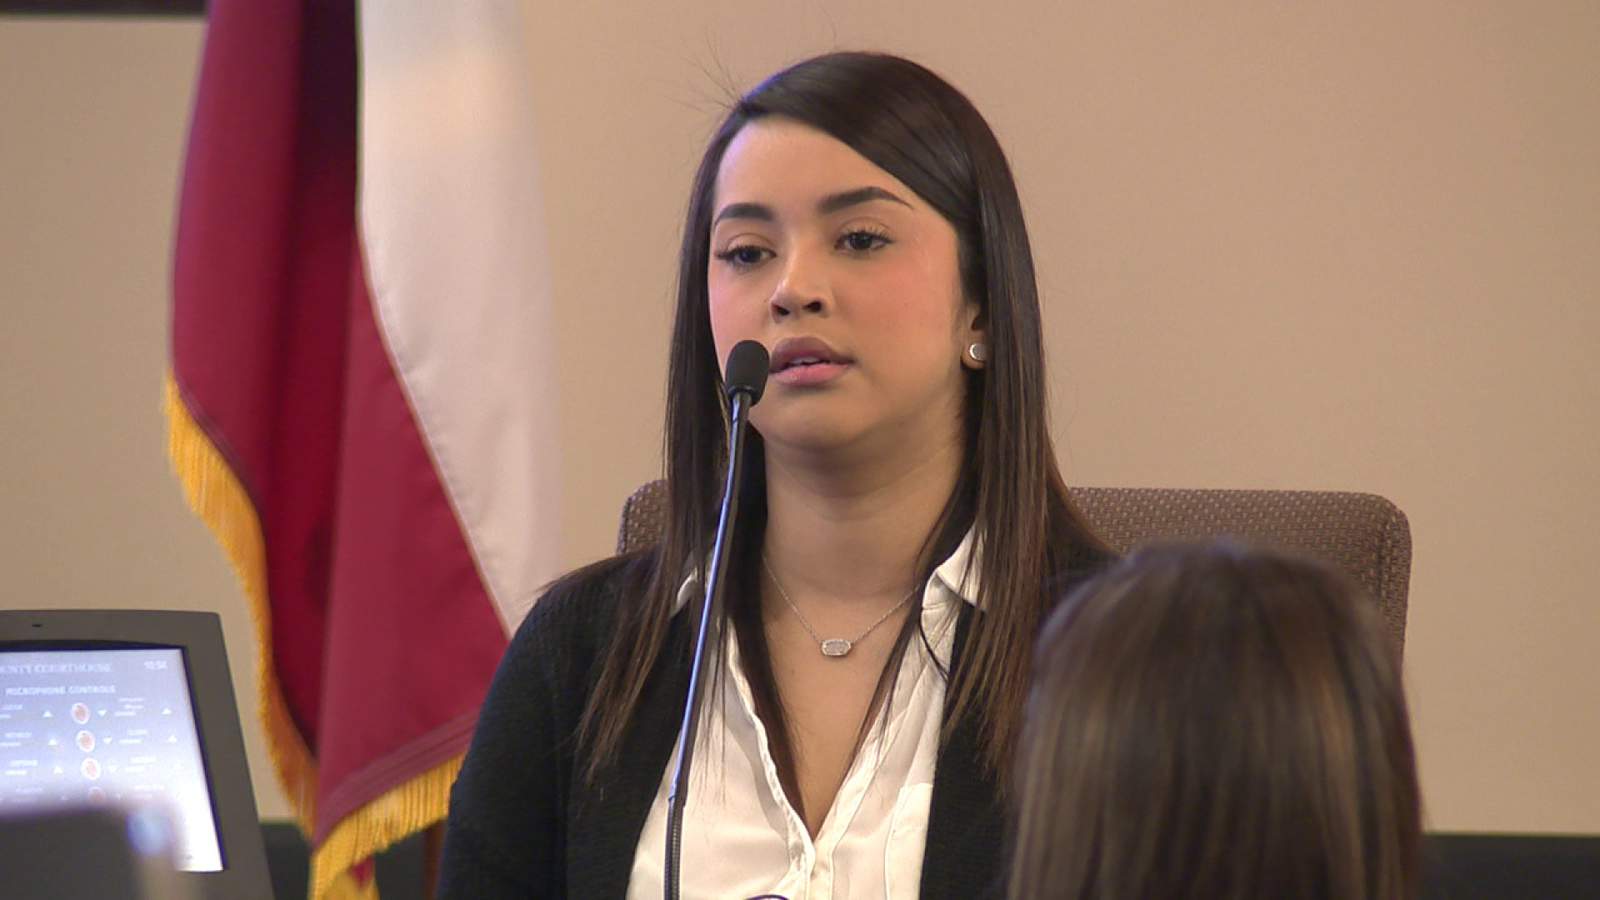 Survivors of fatal drunk driving crash share their story during suspect’s trial